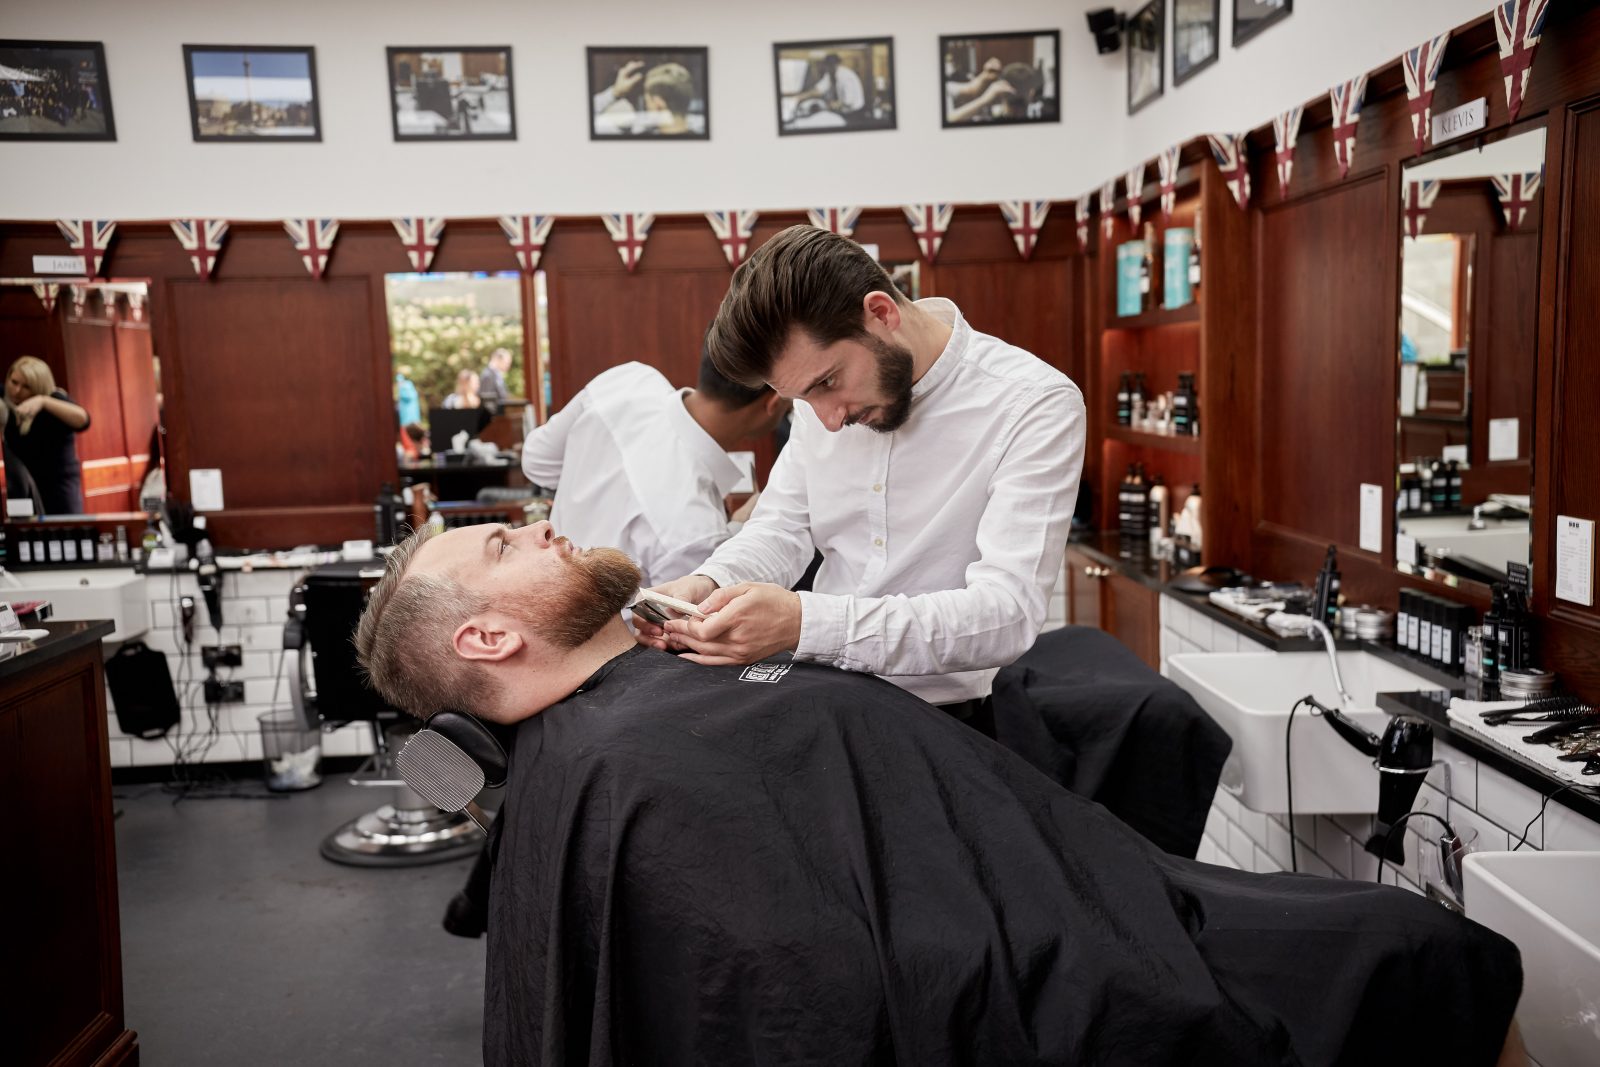 San Jose Barber Shop Guide: Where to Get the Best Haircut